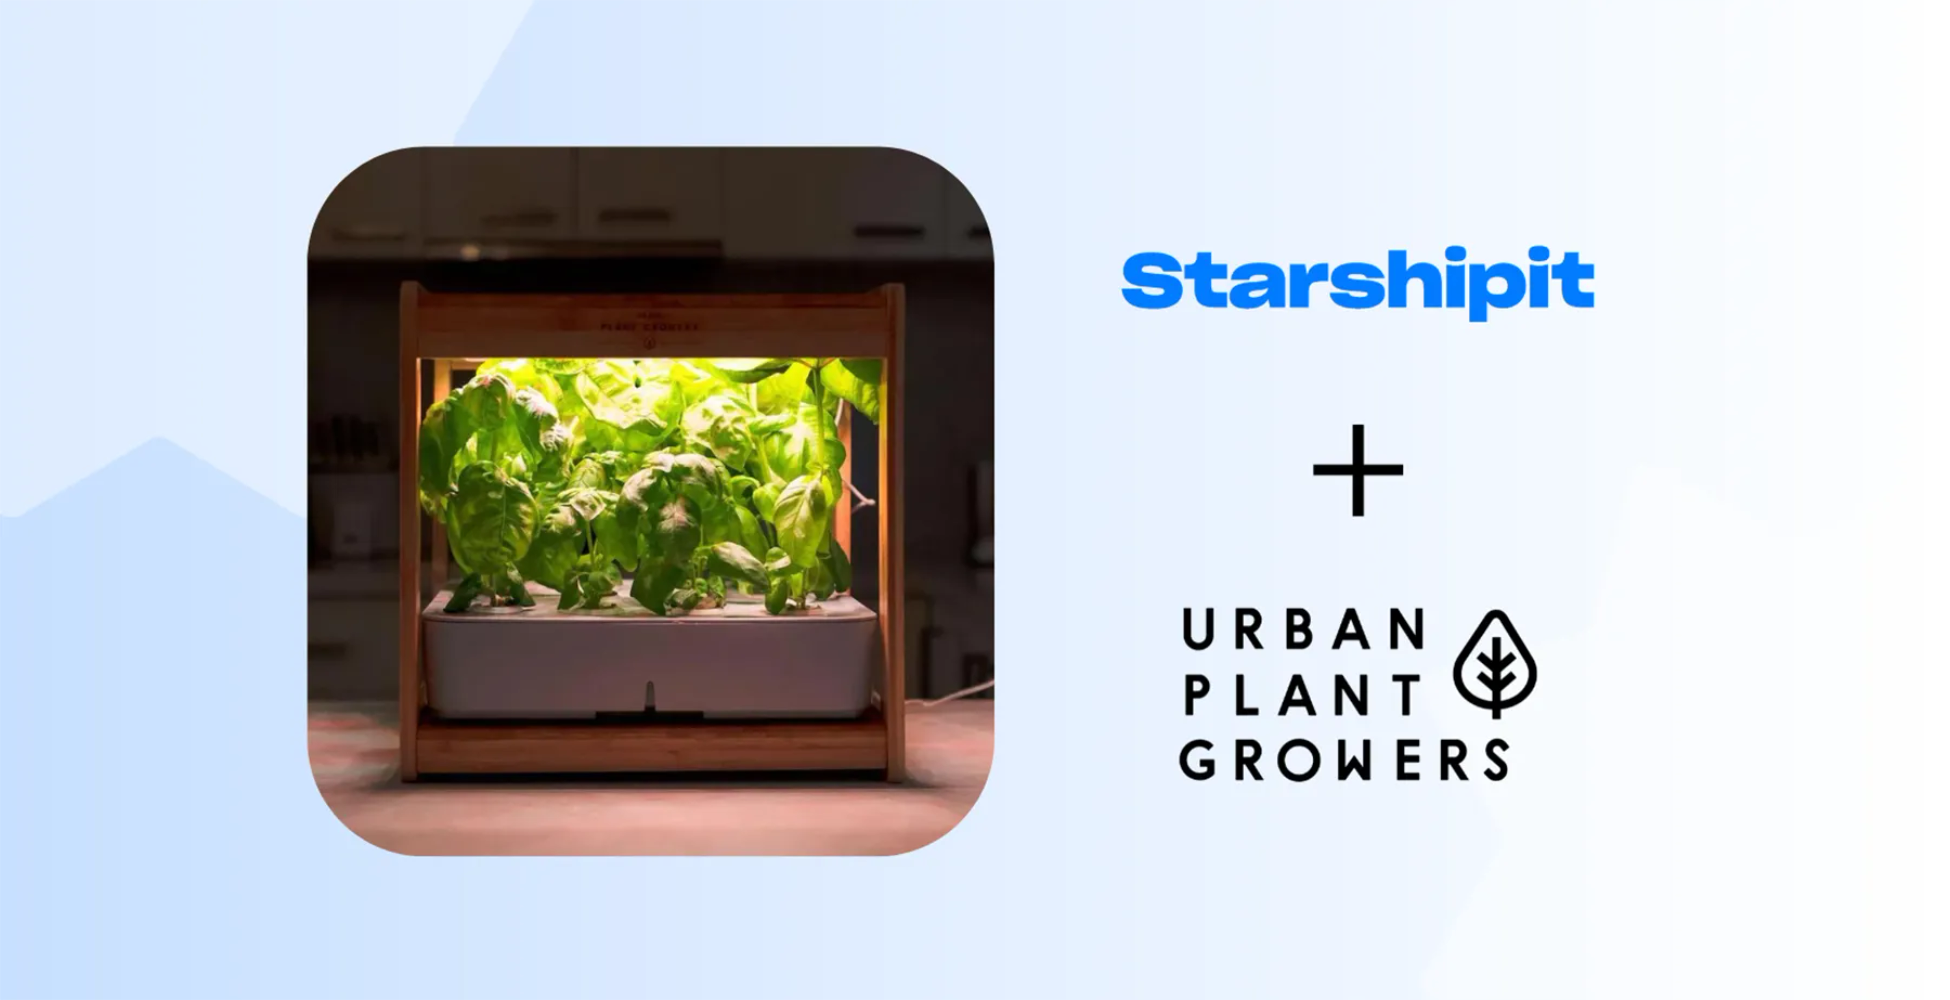 Starshipit and Urban Plant Growers case study